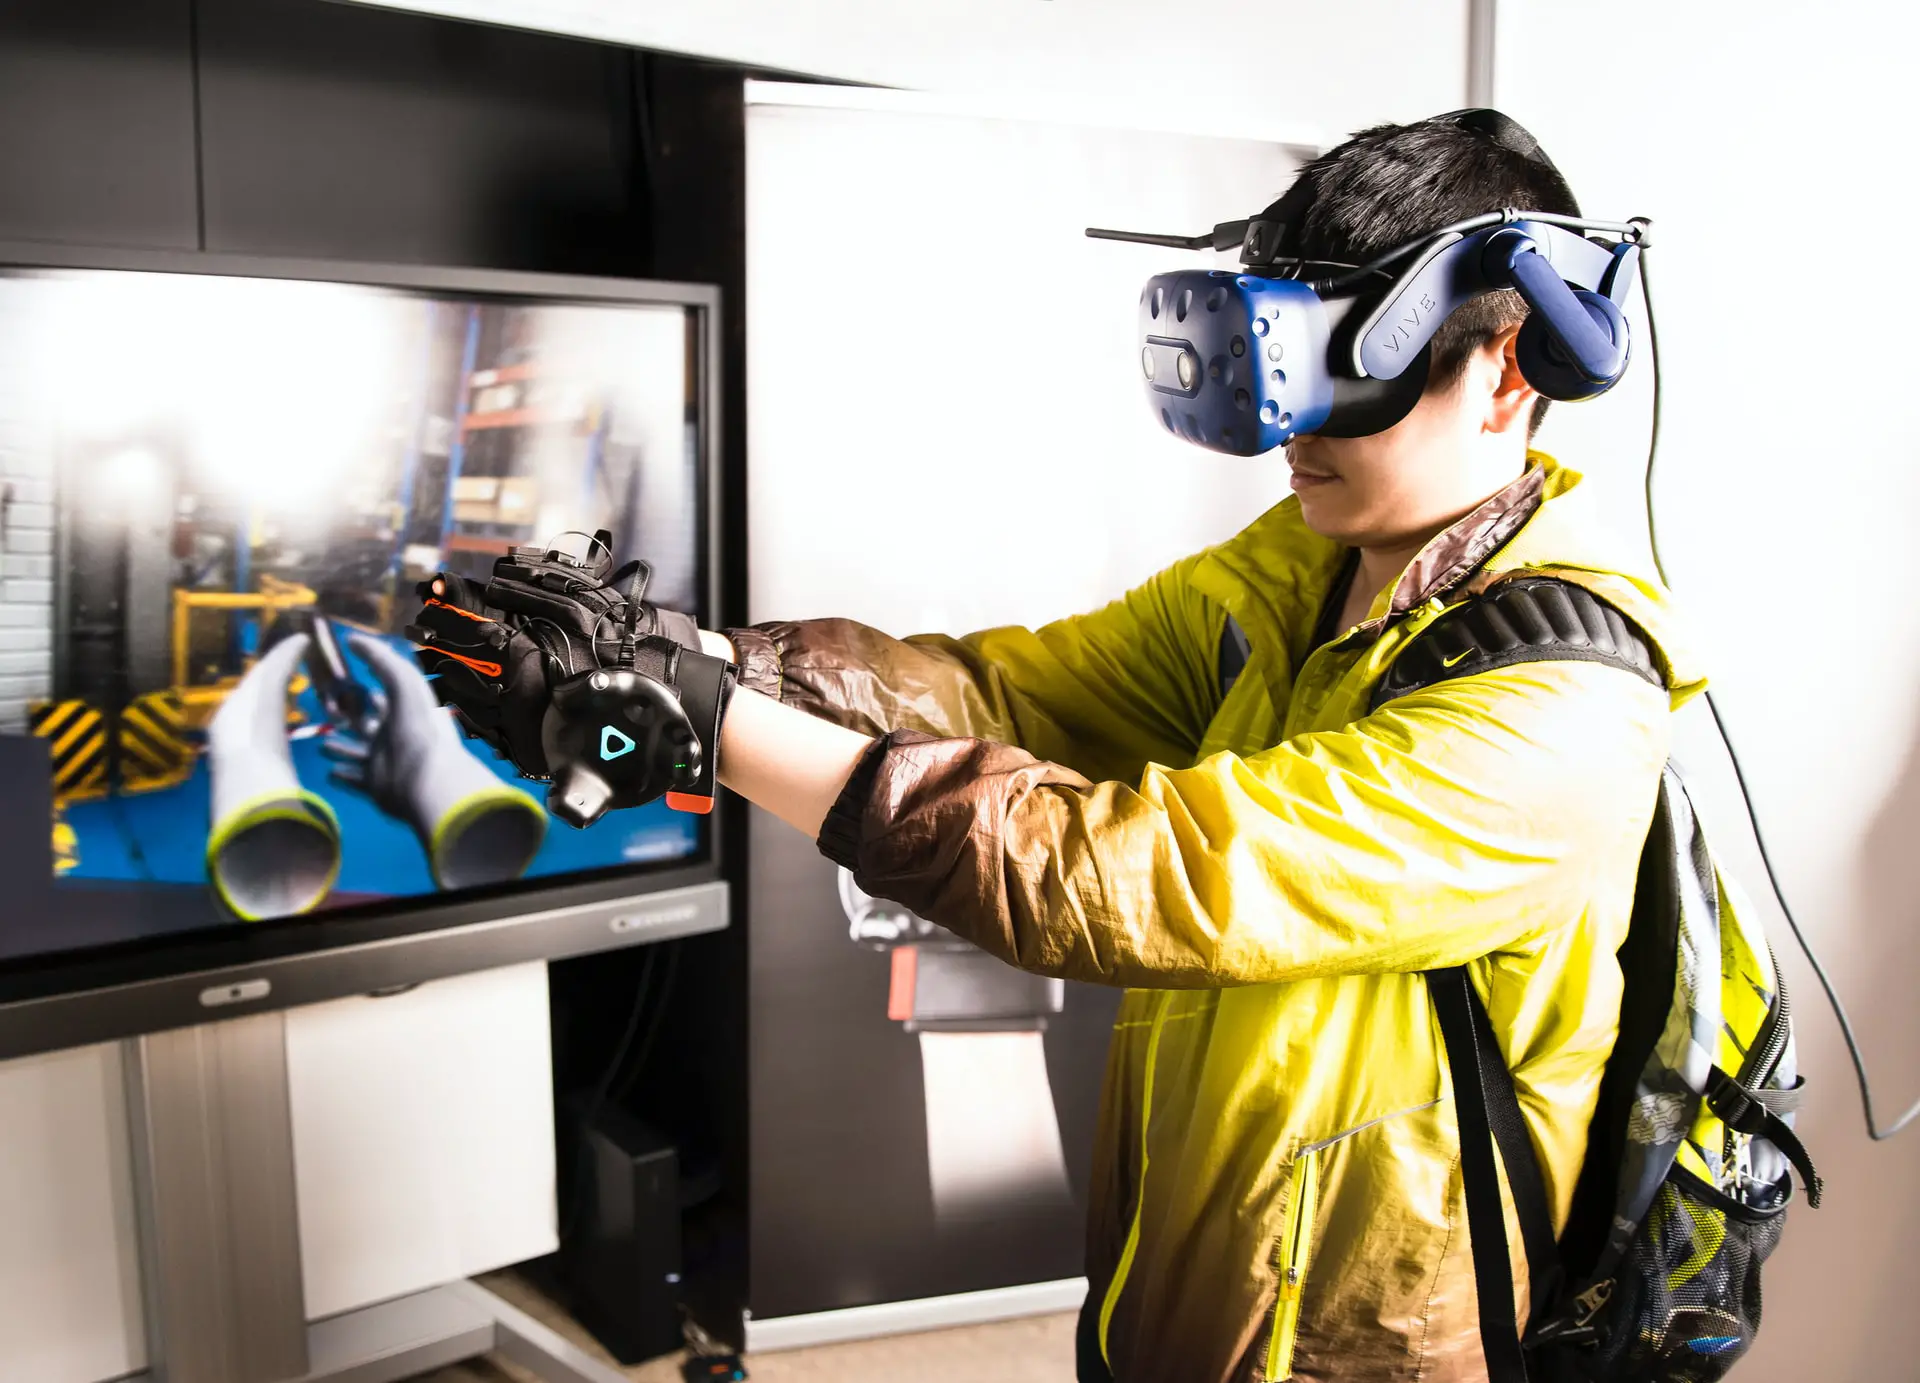 bHaptics’ Unveils the TactSuit to Further Immerse Users into VR Gaming